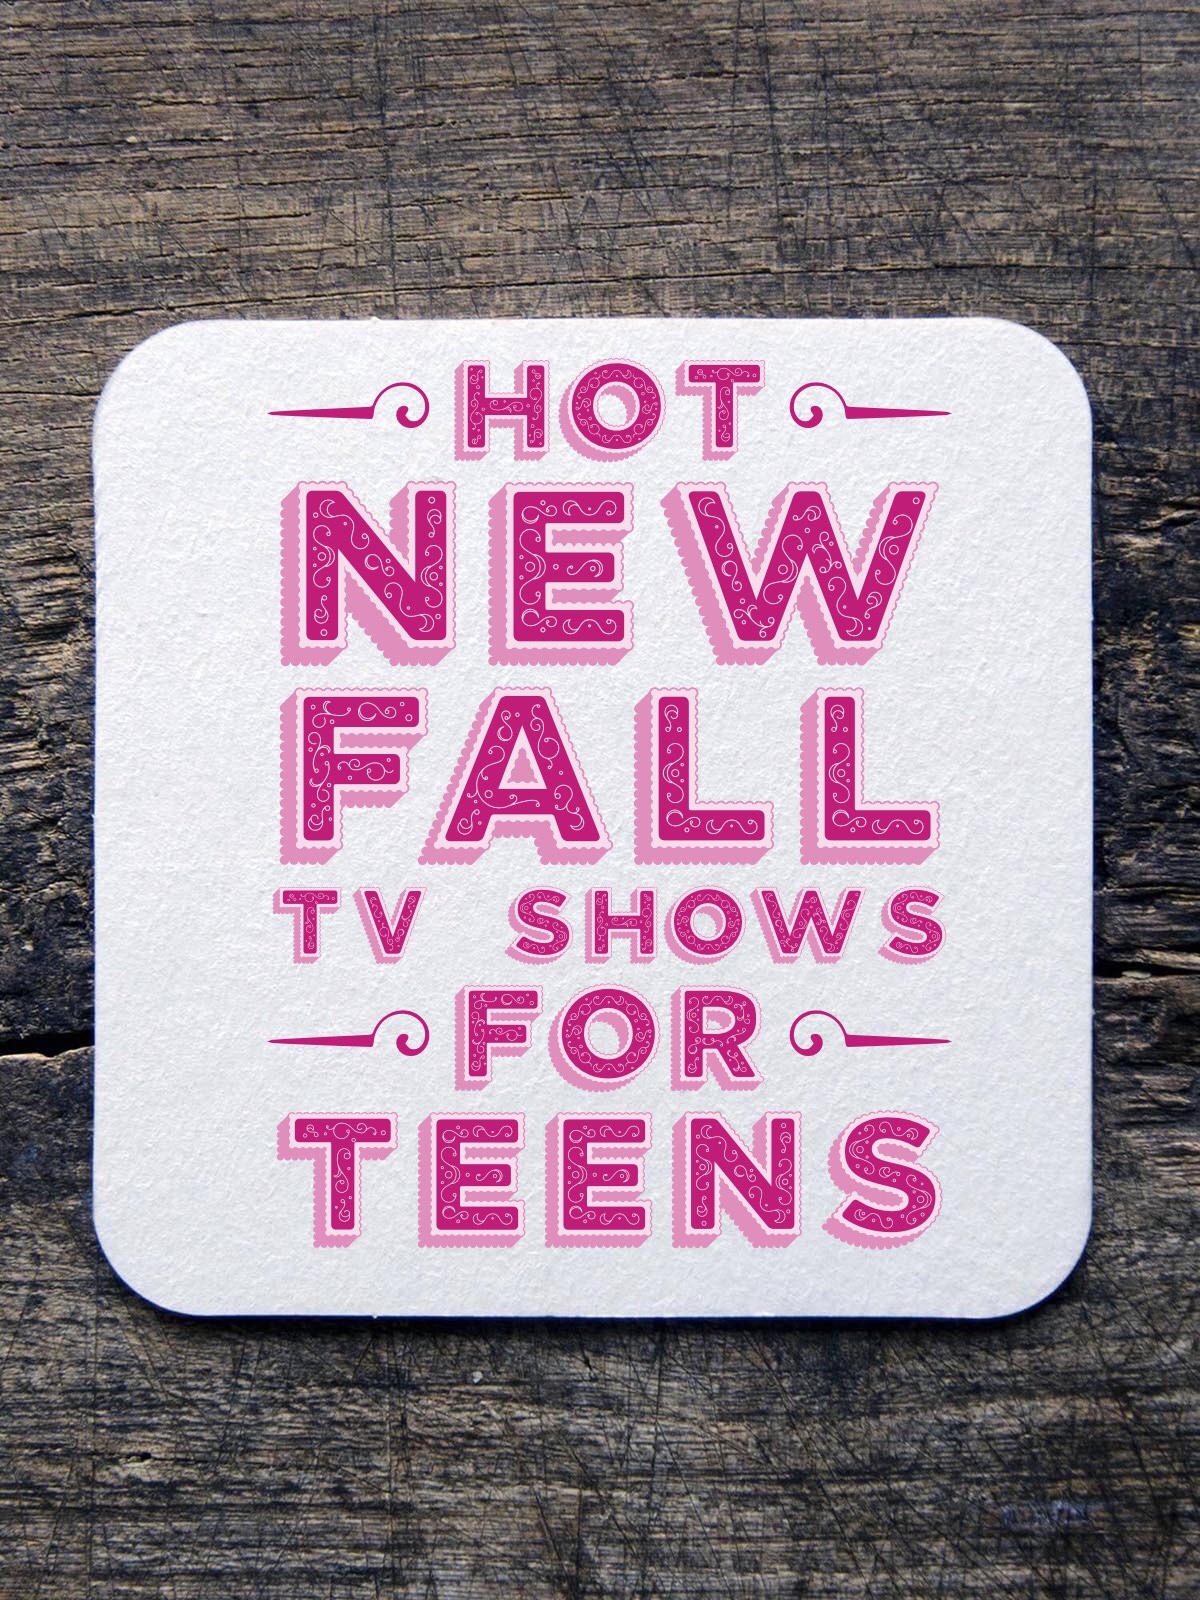 Check out the hottest new Fall shows for 2015 for the teen scene, along with sneak peaks and trailers! Then set your DVR and get ready for all those premieres!